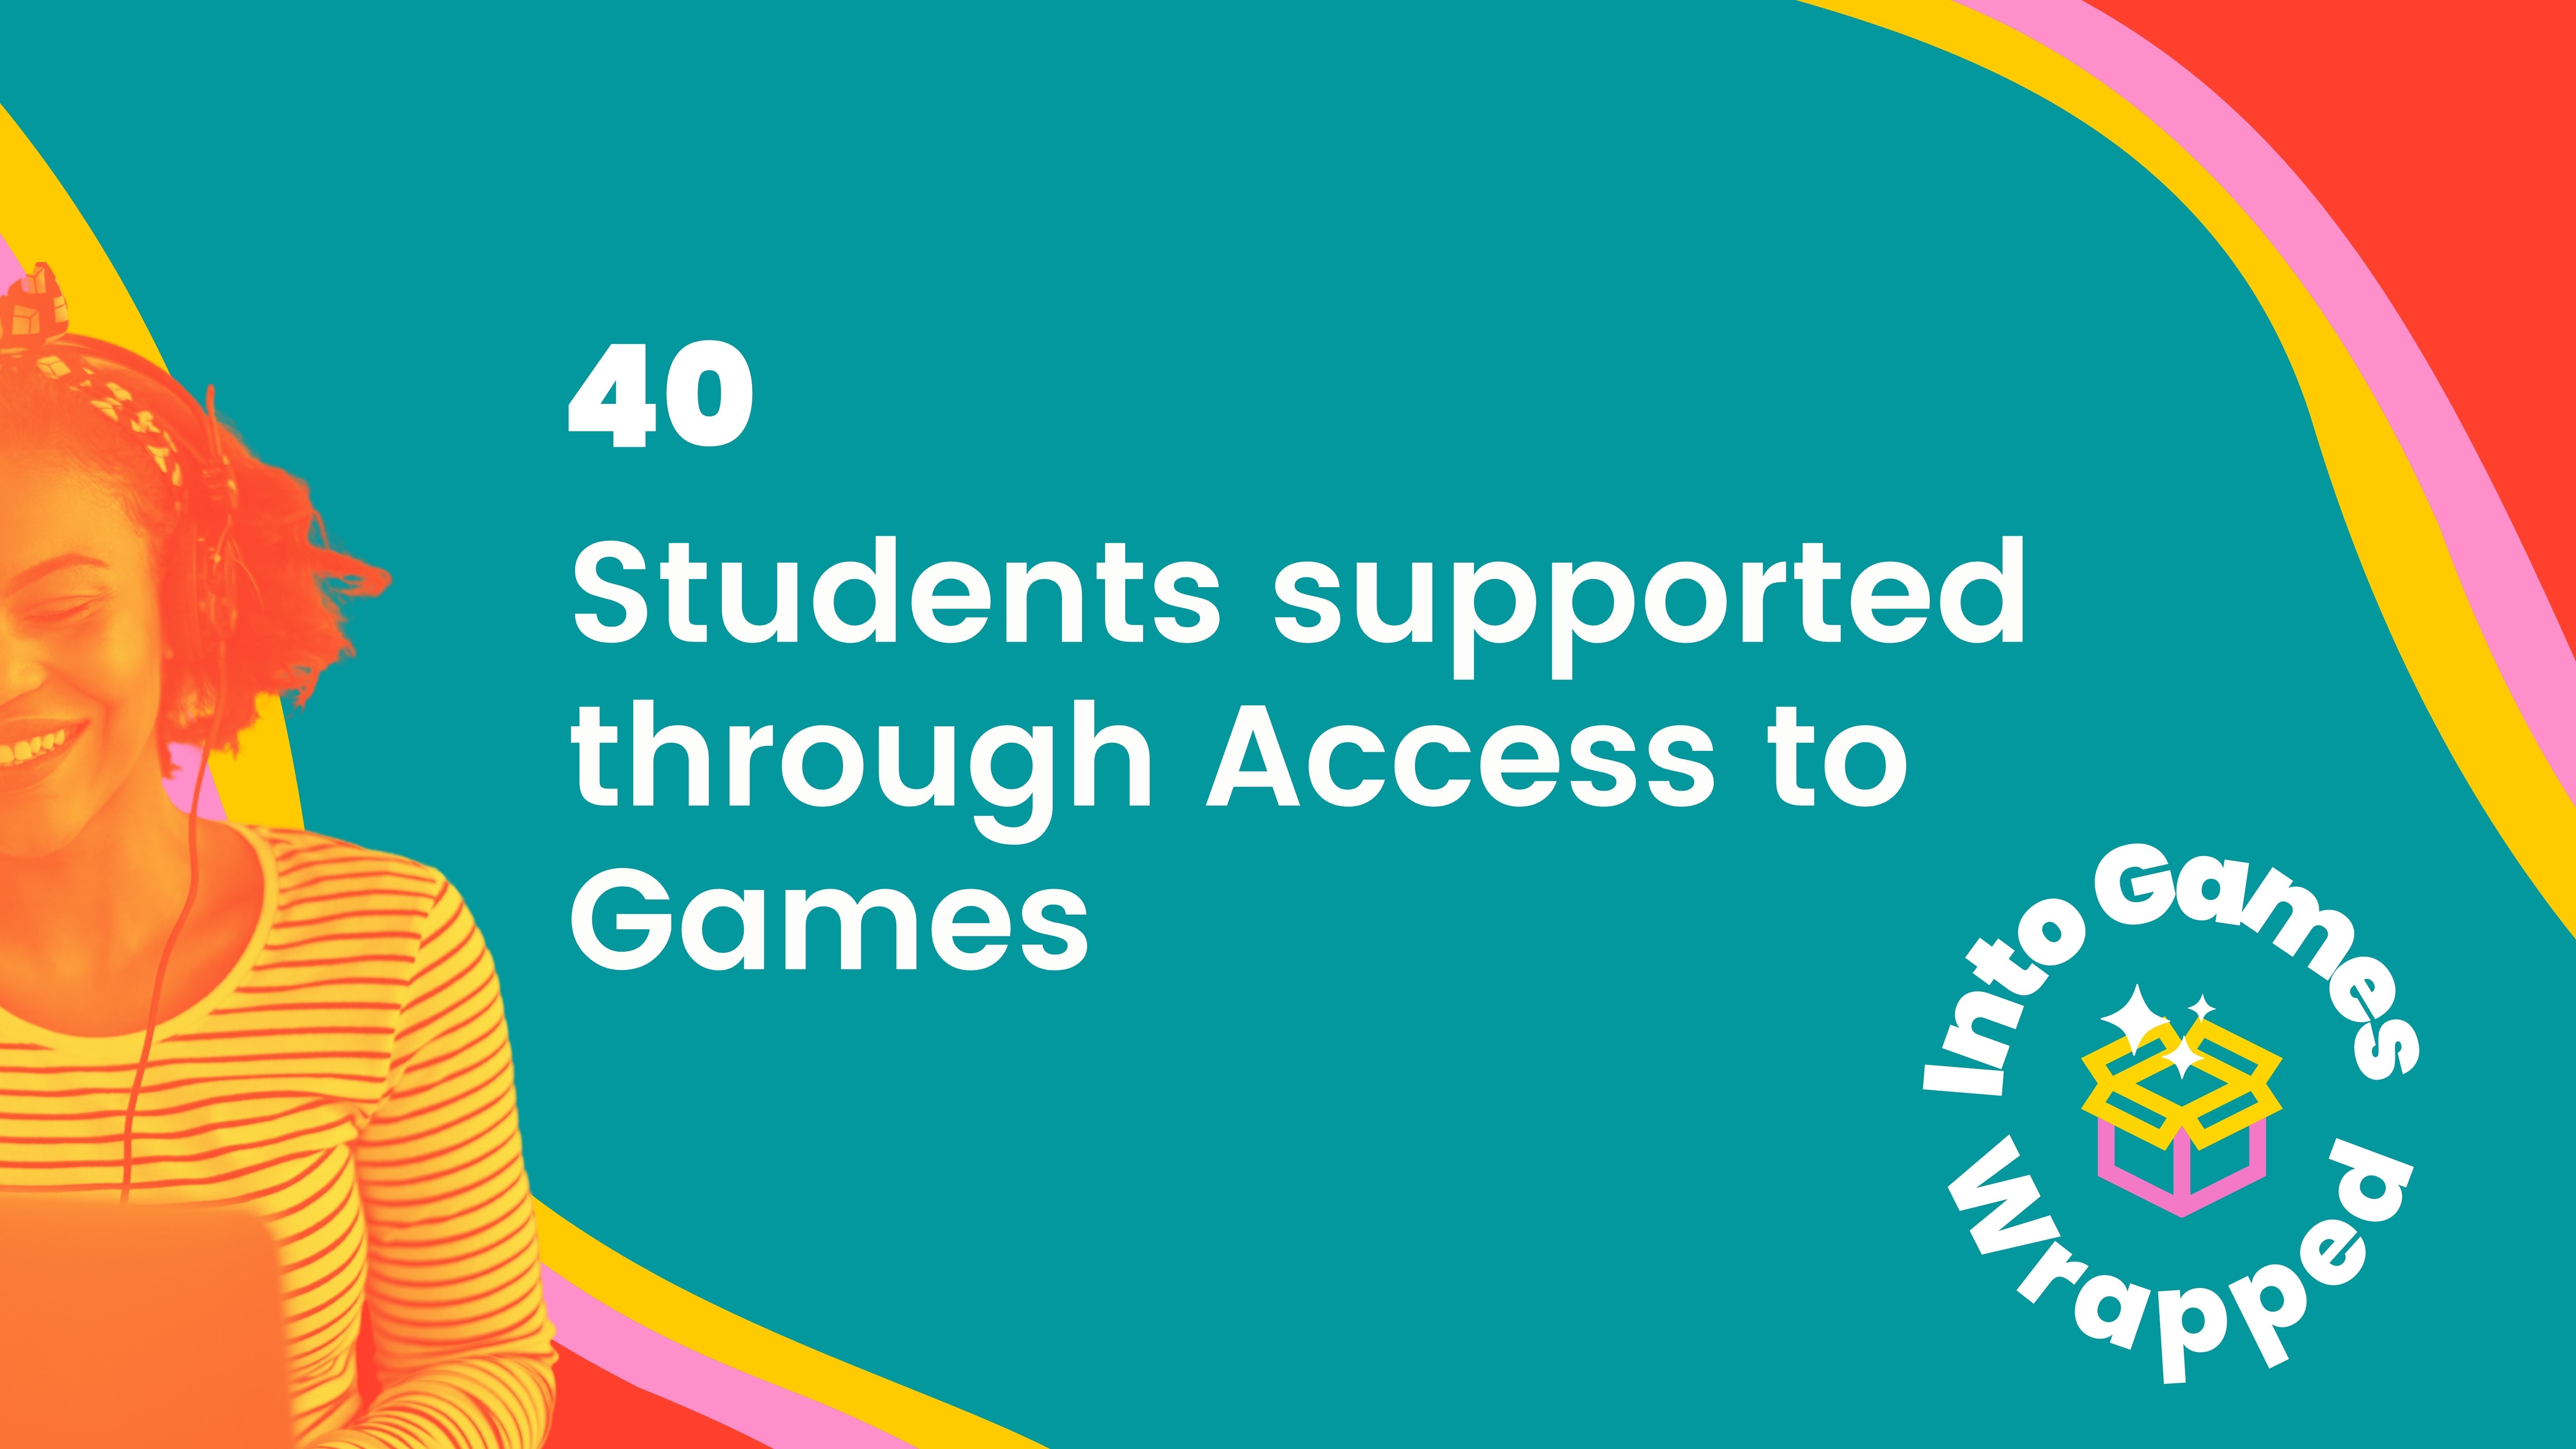 40 Students supported through Access to Games